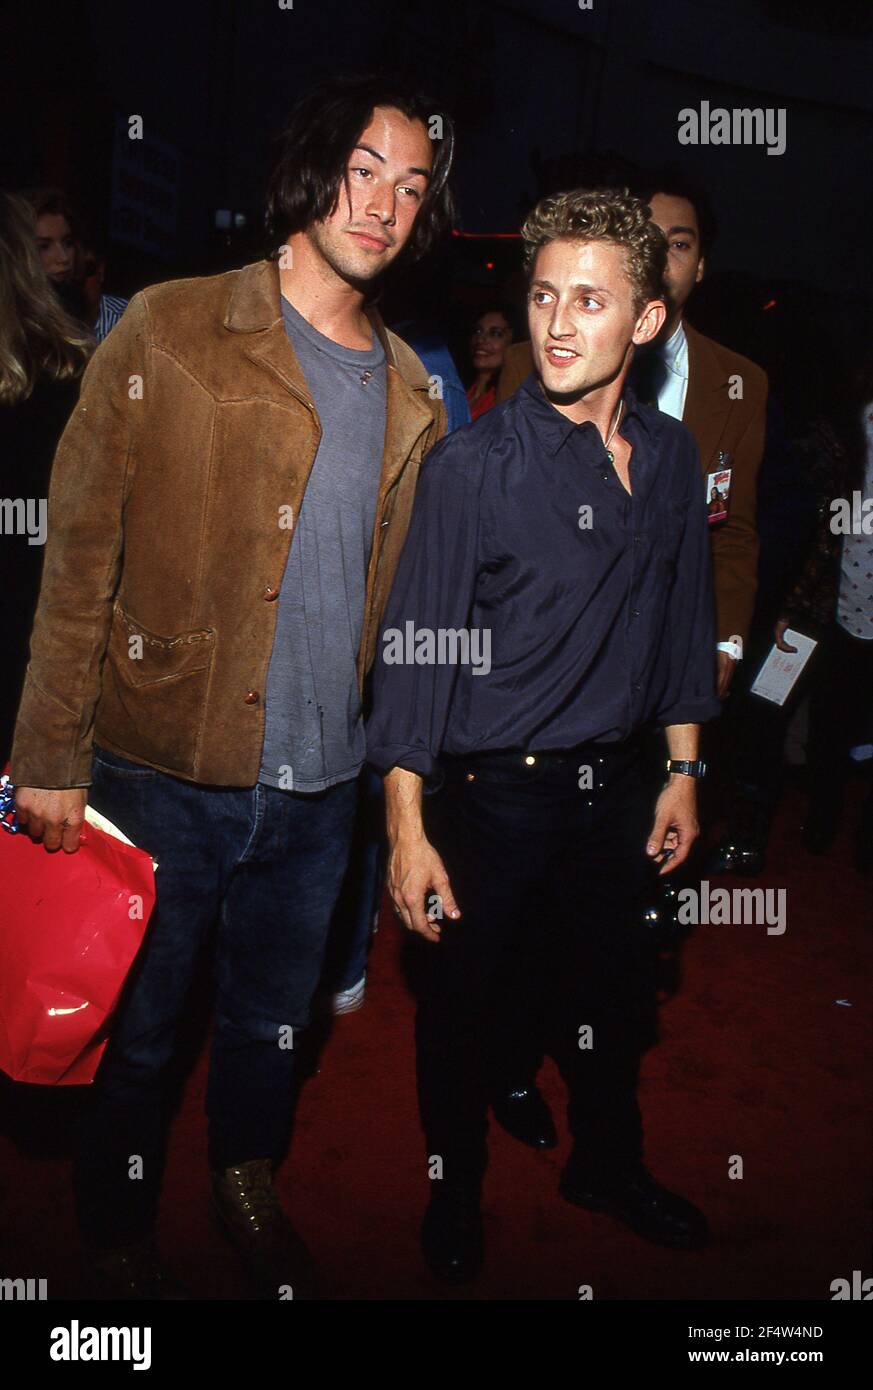 HOLLYWOOD, CA - JULY 18: Alex Winter and Keanu Reeves attend the premiere of 'Bill and Ted's Bogus Journey' on July 18, 1991 at the Mann Chinese Theater in Hollywood, California Credit: Ralph Dominguez/MediaPunch Stock Photo